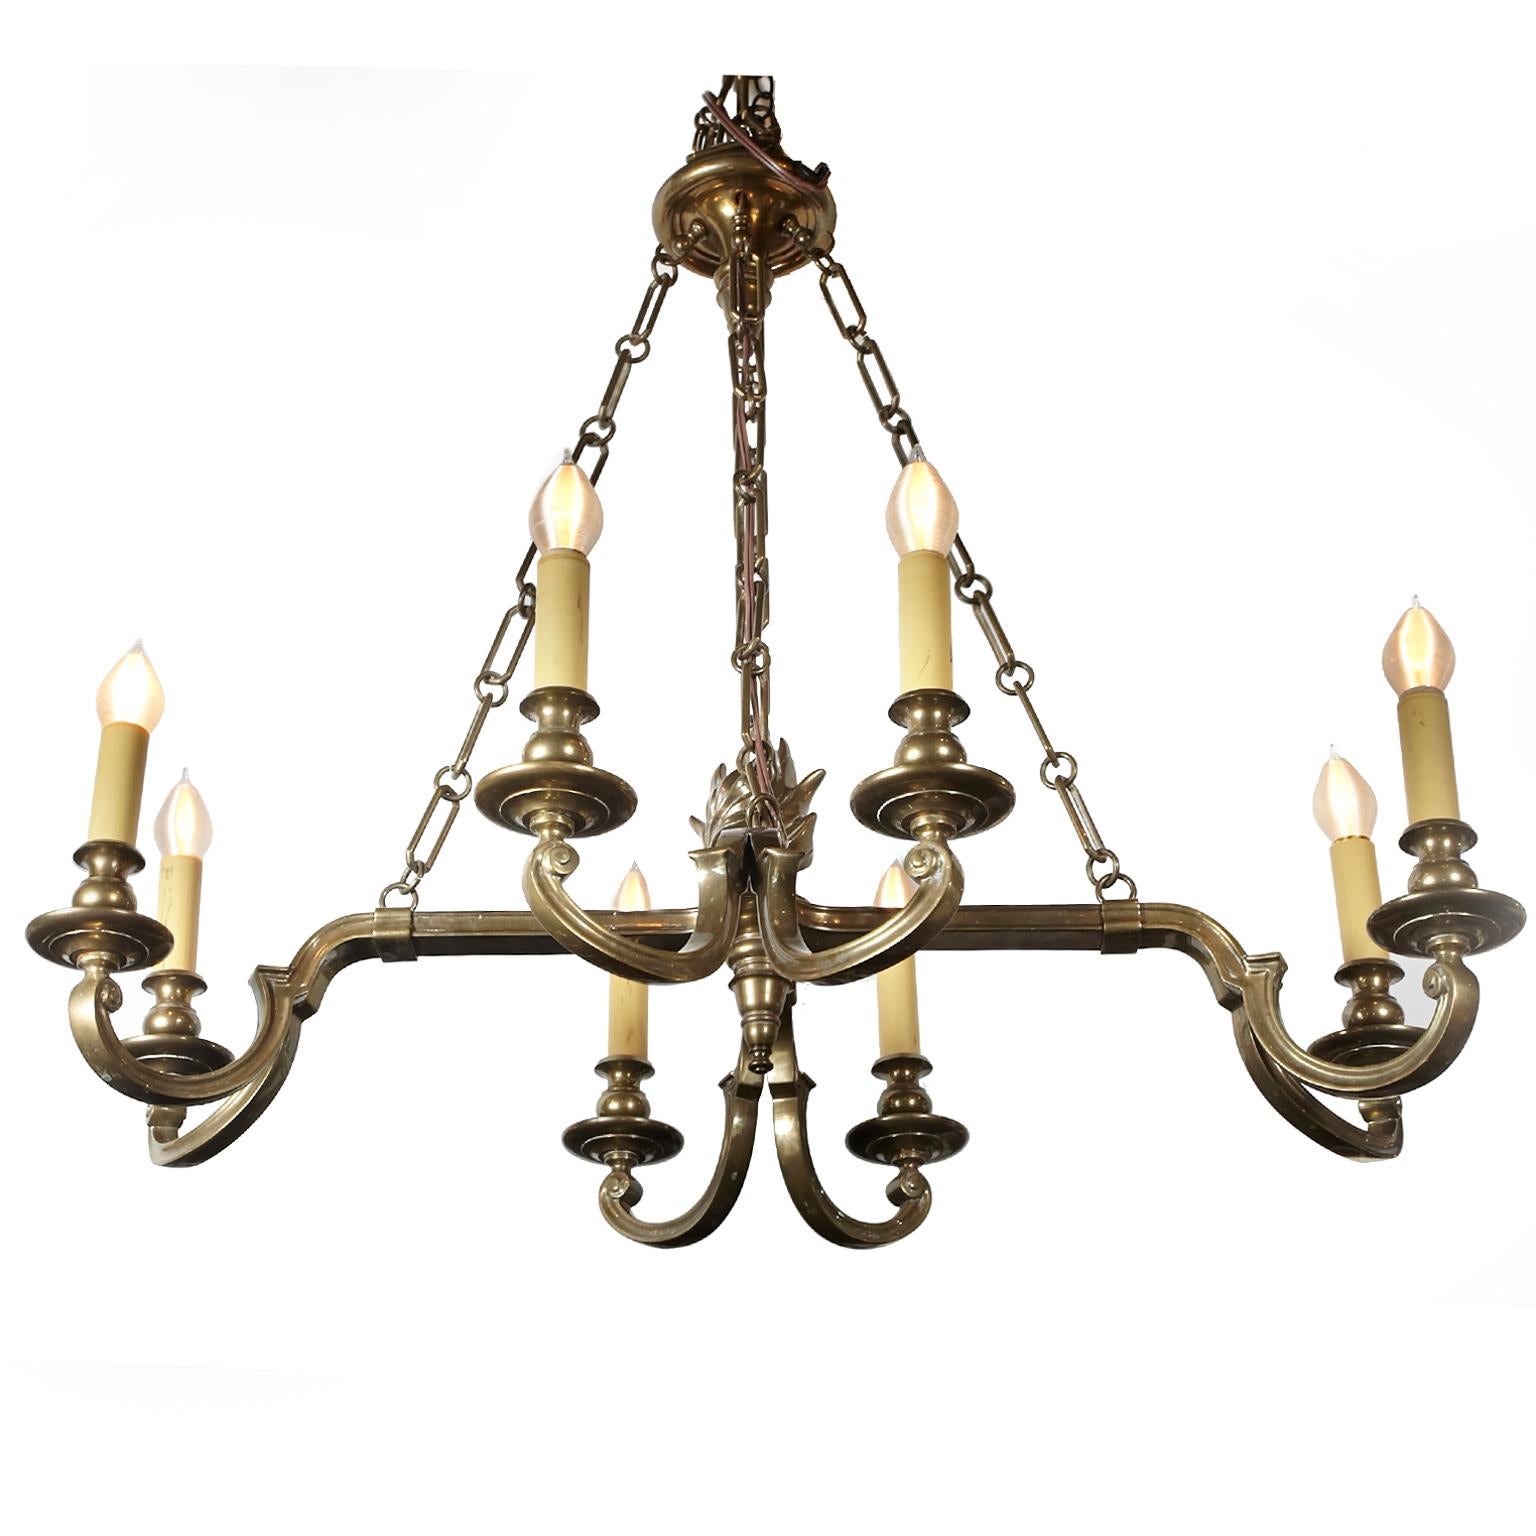 Exquisite heavy vintage Chapman eight light chandelier with brass torch center.
Label intact and dated 1979.